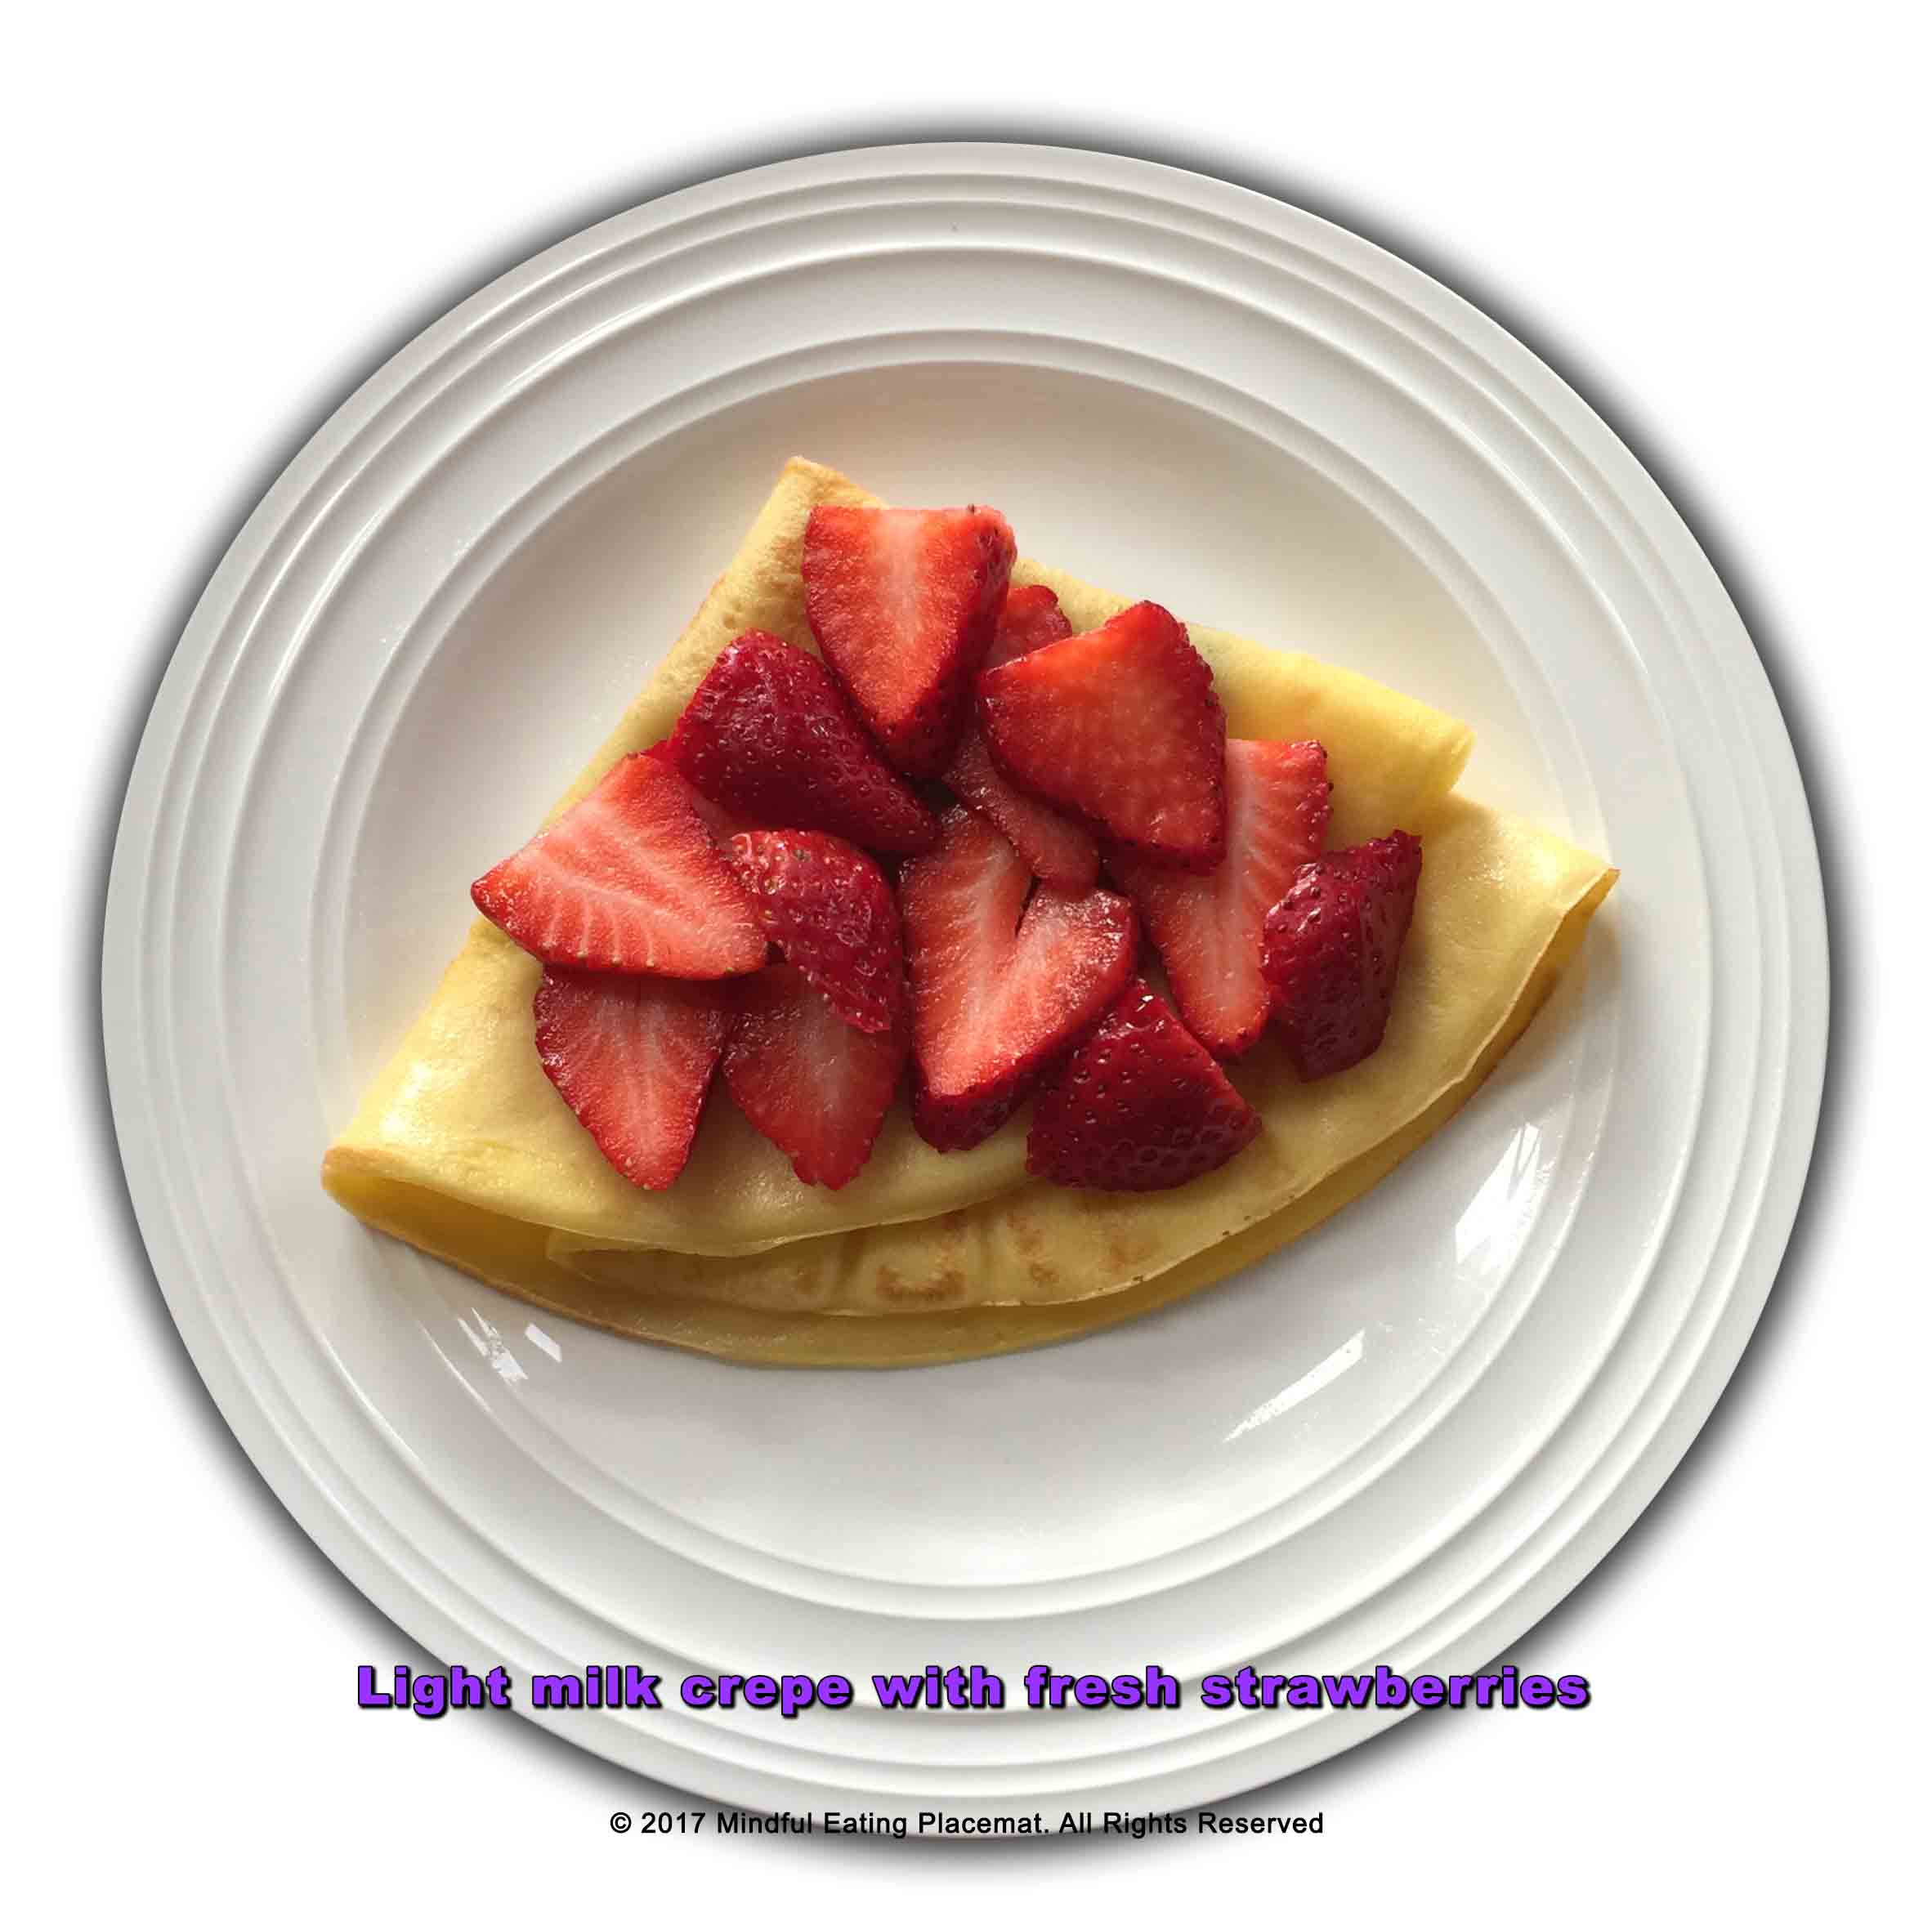 Light crepe with fresh strawberries